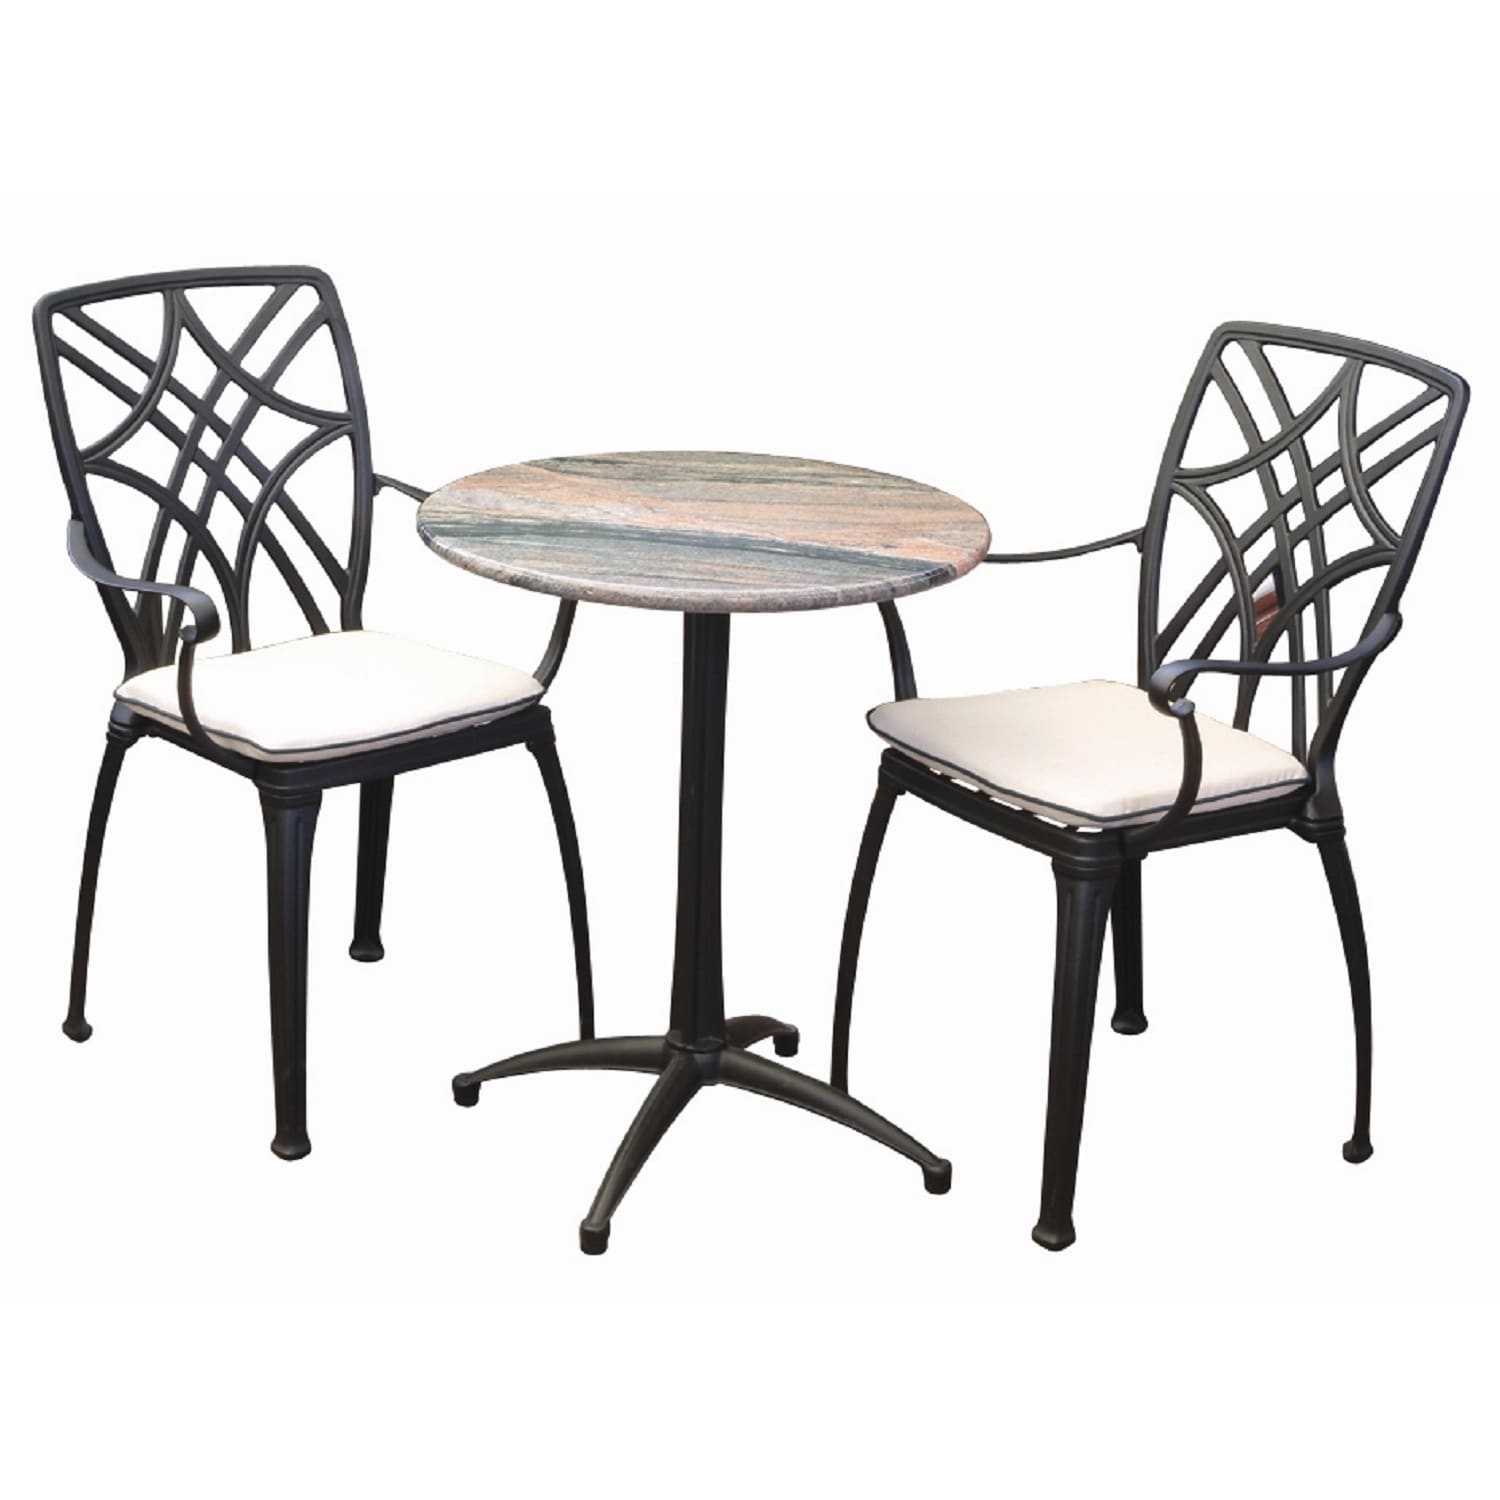 Bosmere C511 Bistro Set Cover - 49 x 25 in. - Green - image 3 of 4